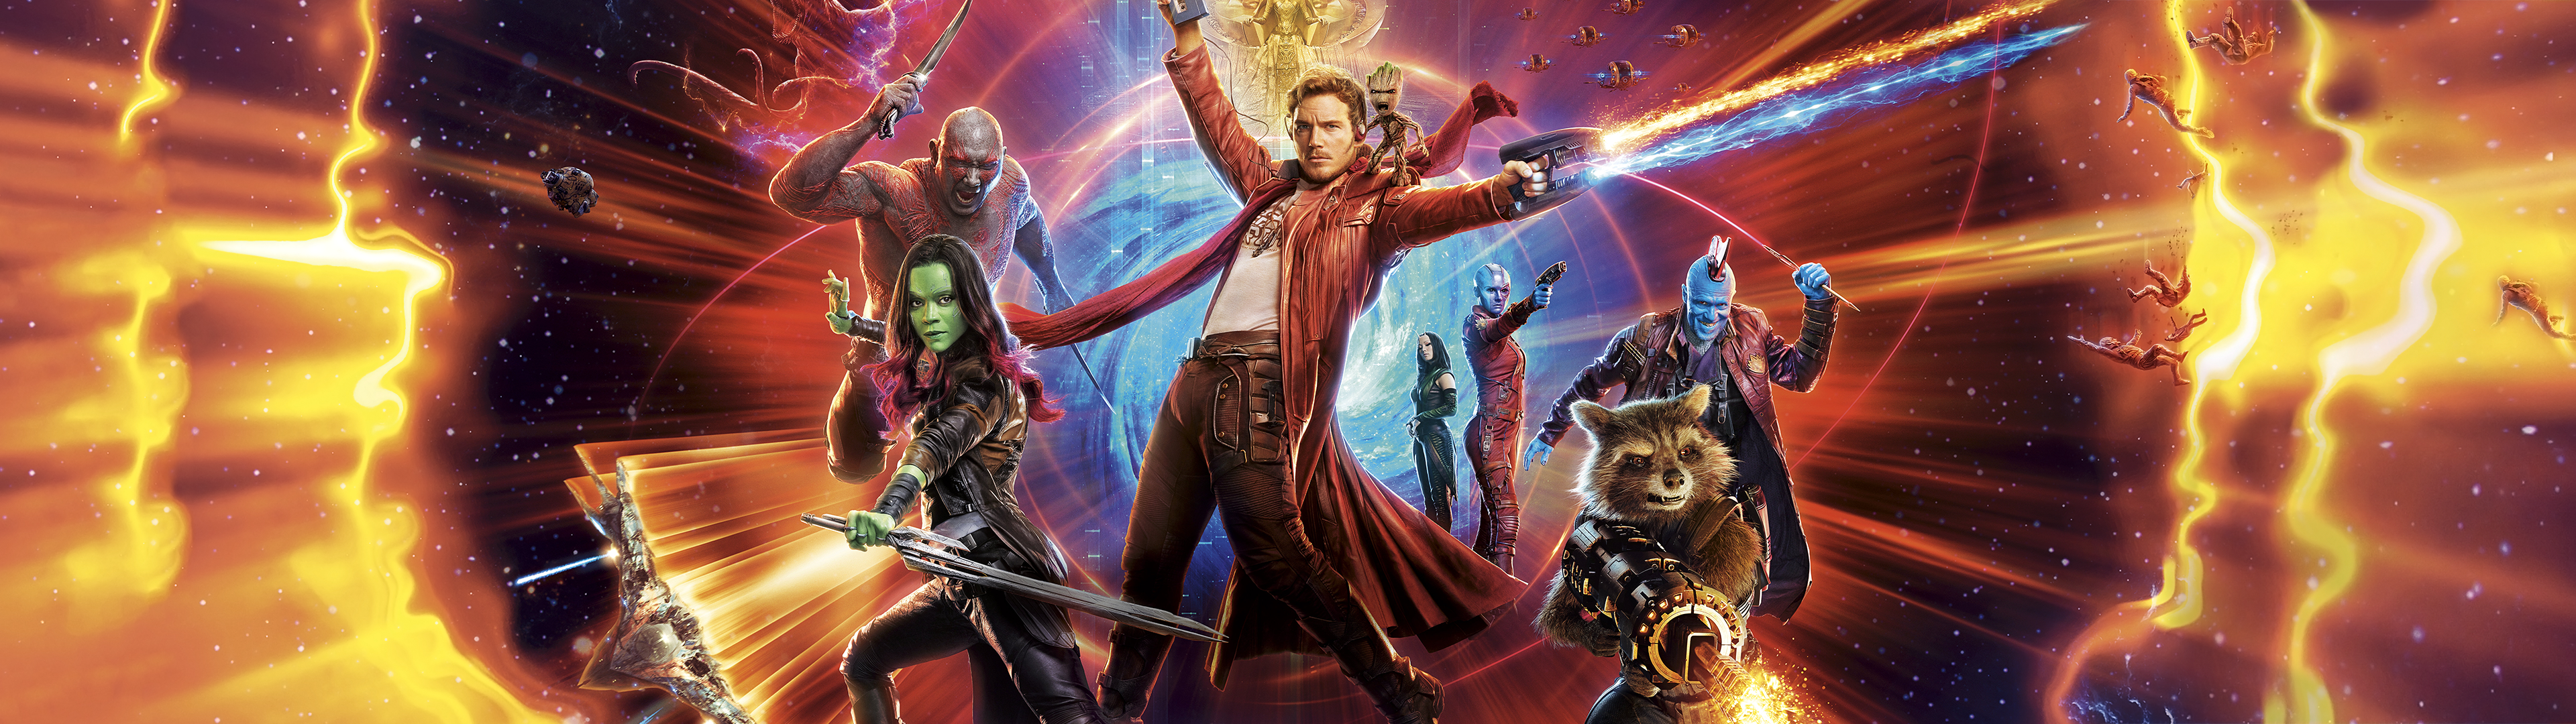 Guardians Of The Galaxy R Multiwall